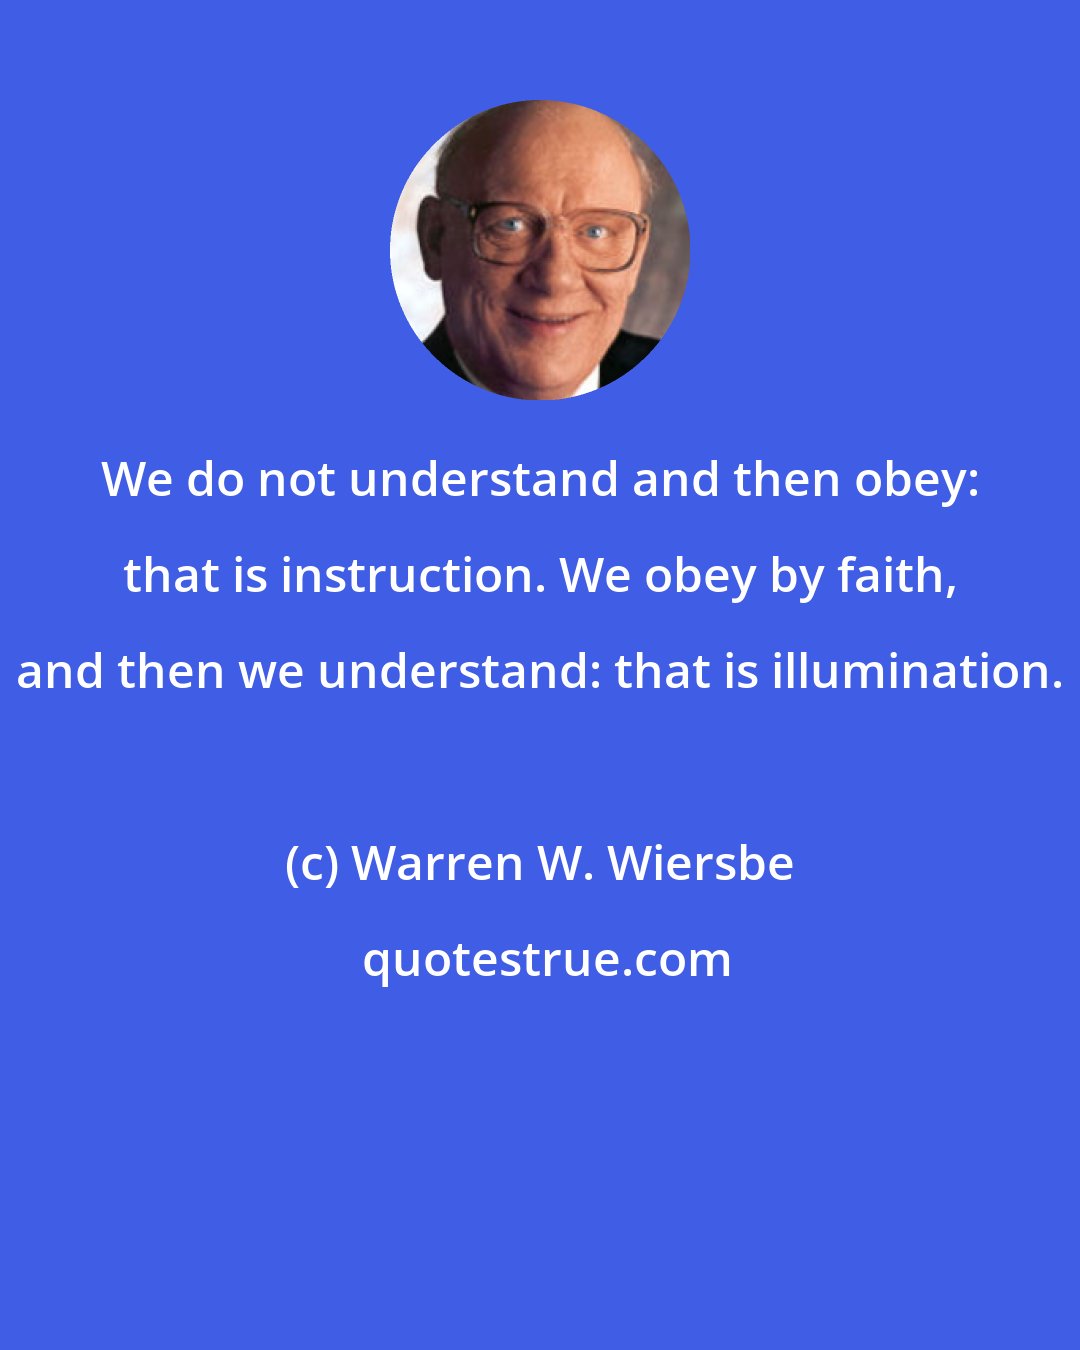 Warren W. Wiersbe: We do not understand and then obey: that is instruction. We obey by faith, and then we understand: that is illumination.